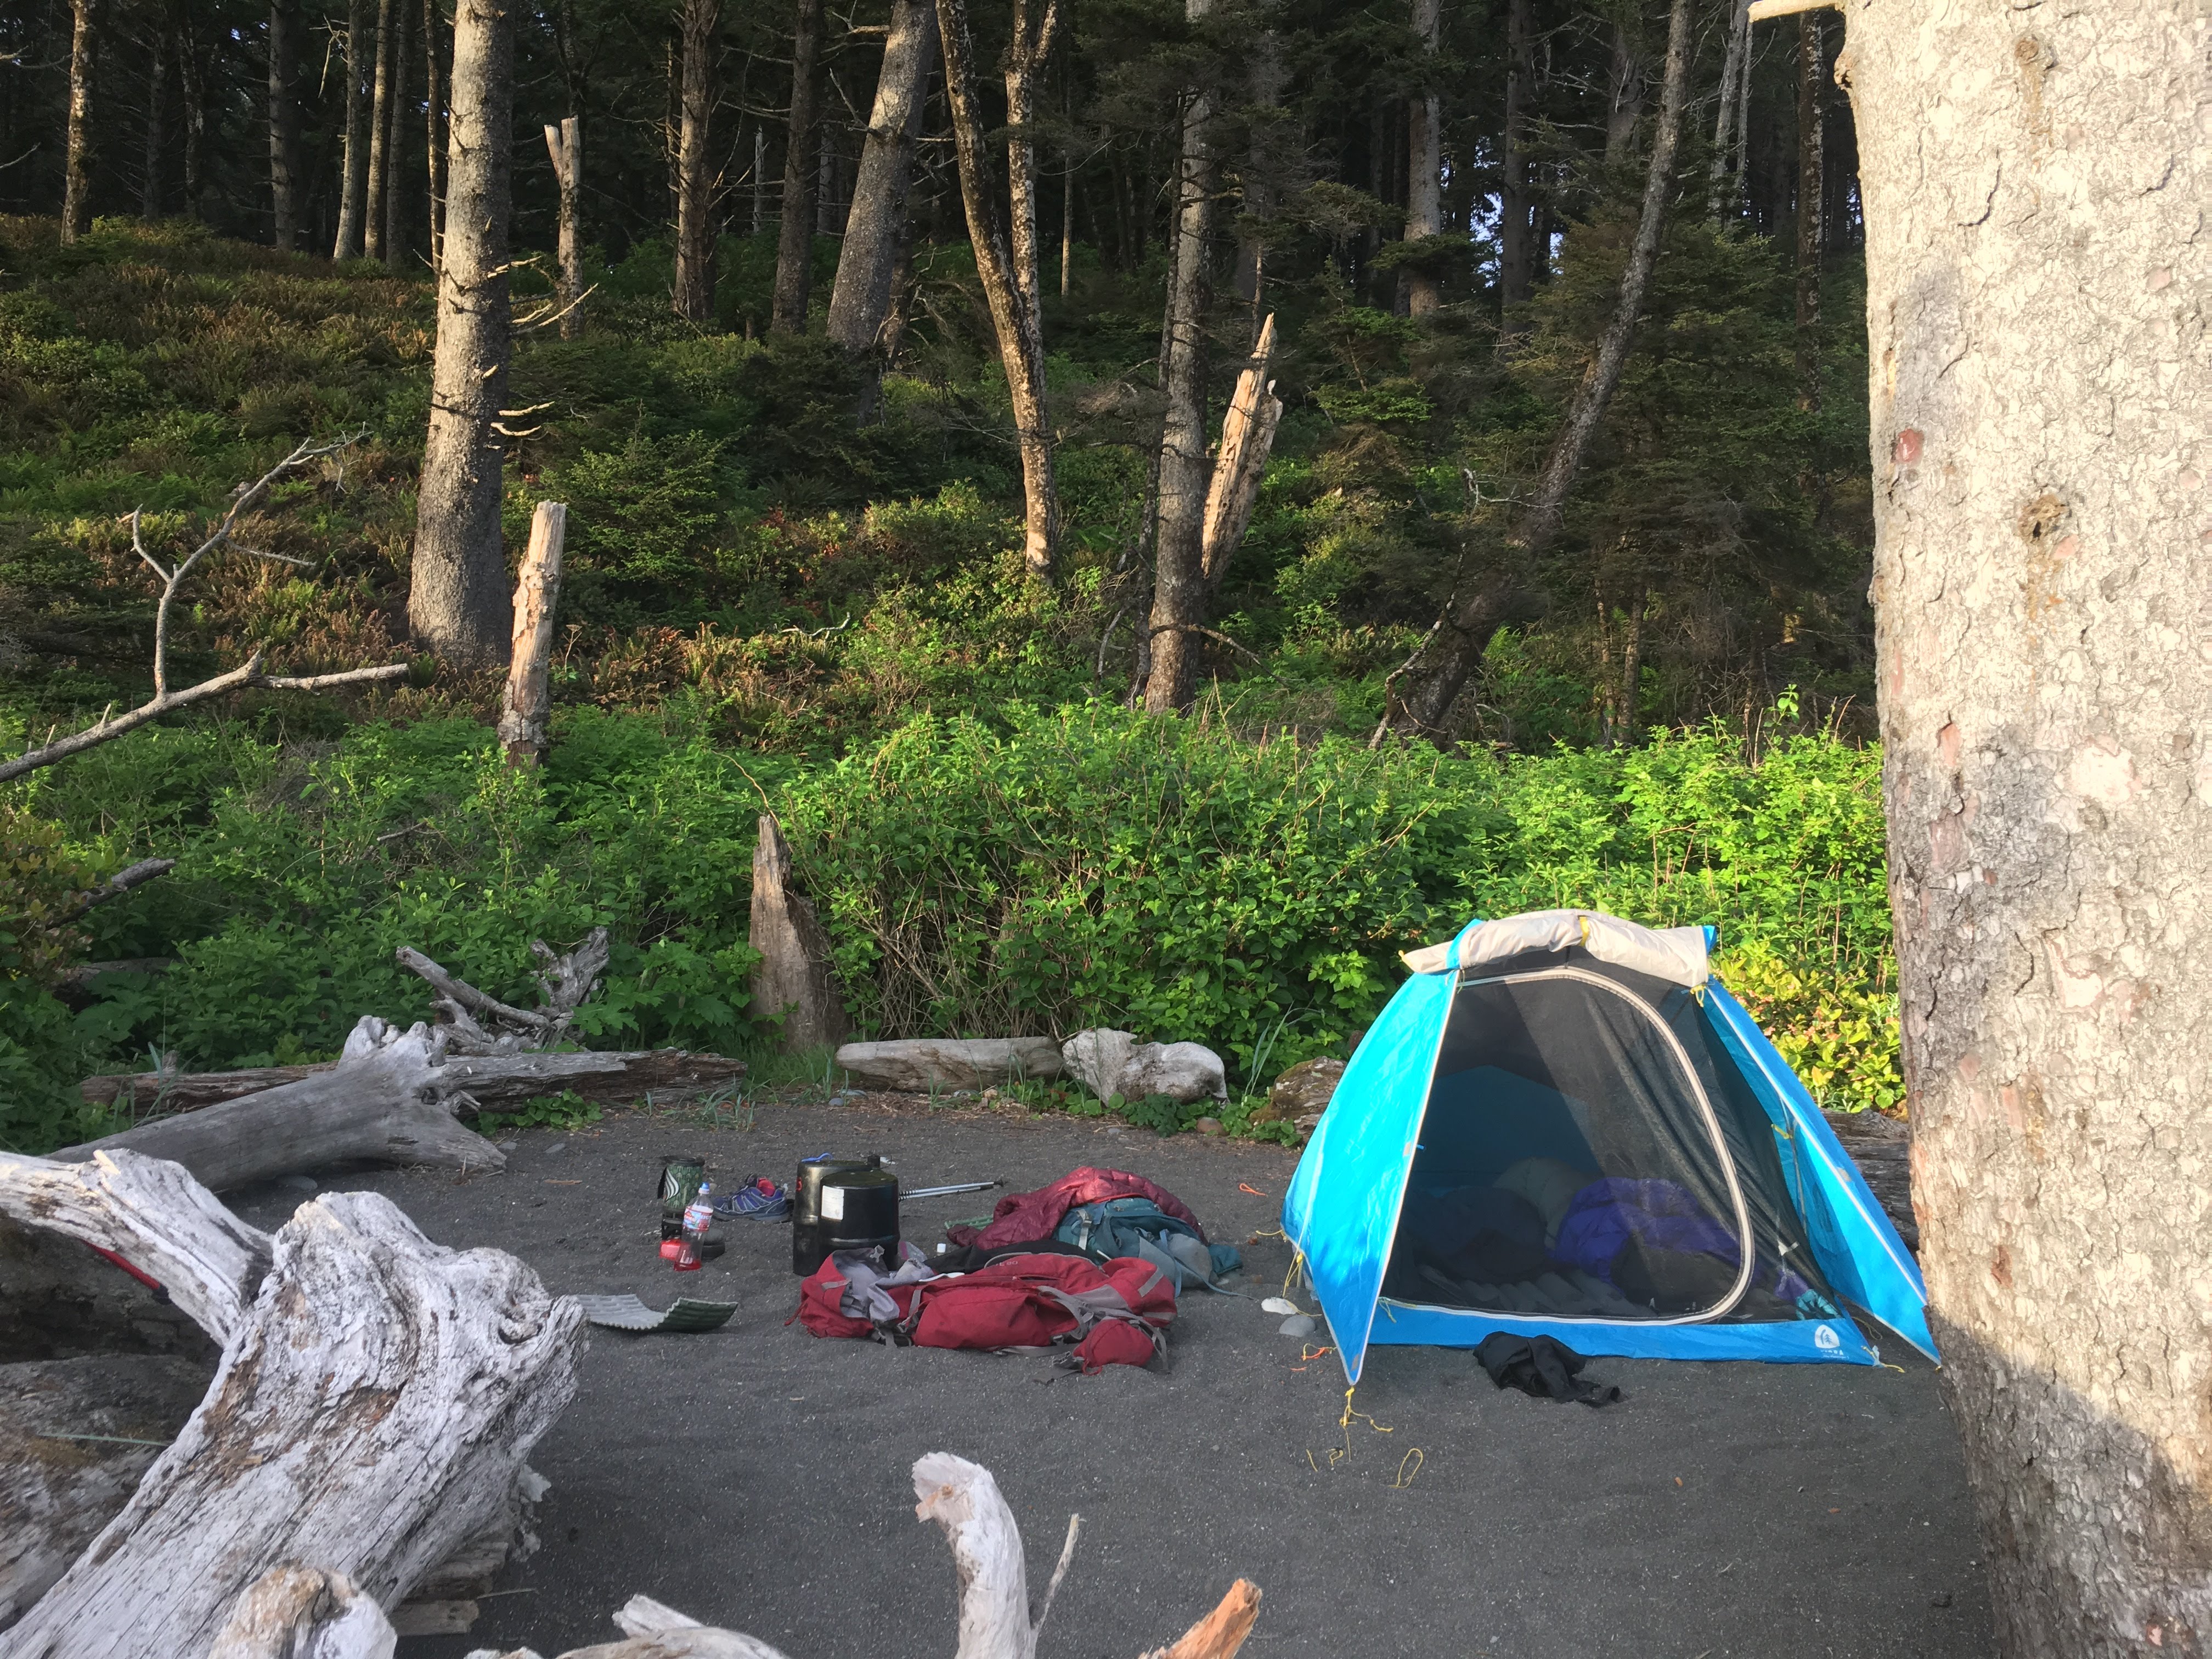 Despite being less than 3 miles from Rialto Beach and the end of our hike, we camped one last night right by Hole-In-The-Wall.